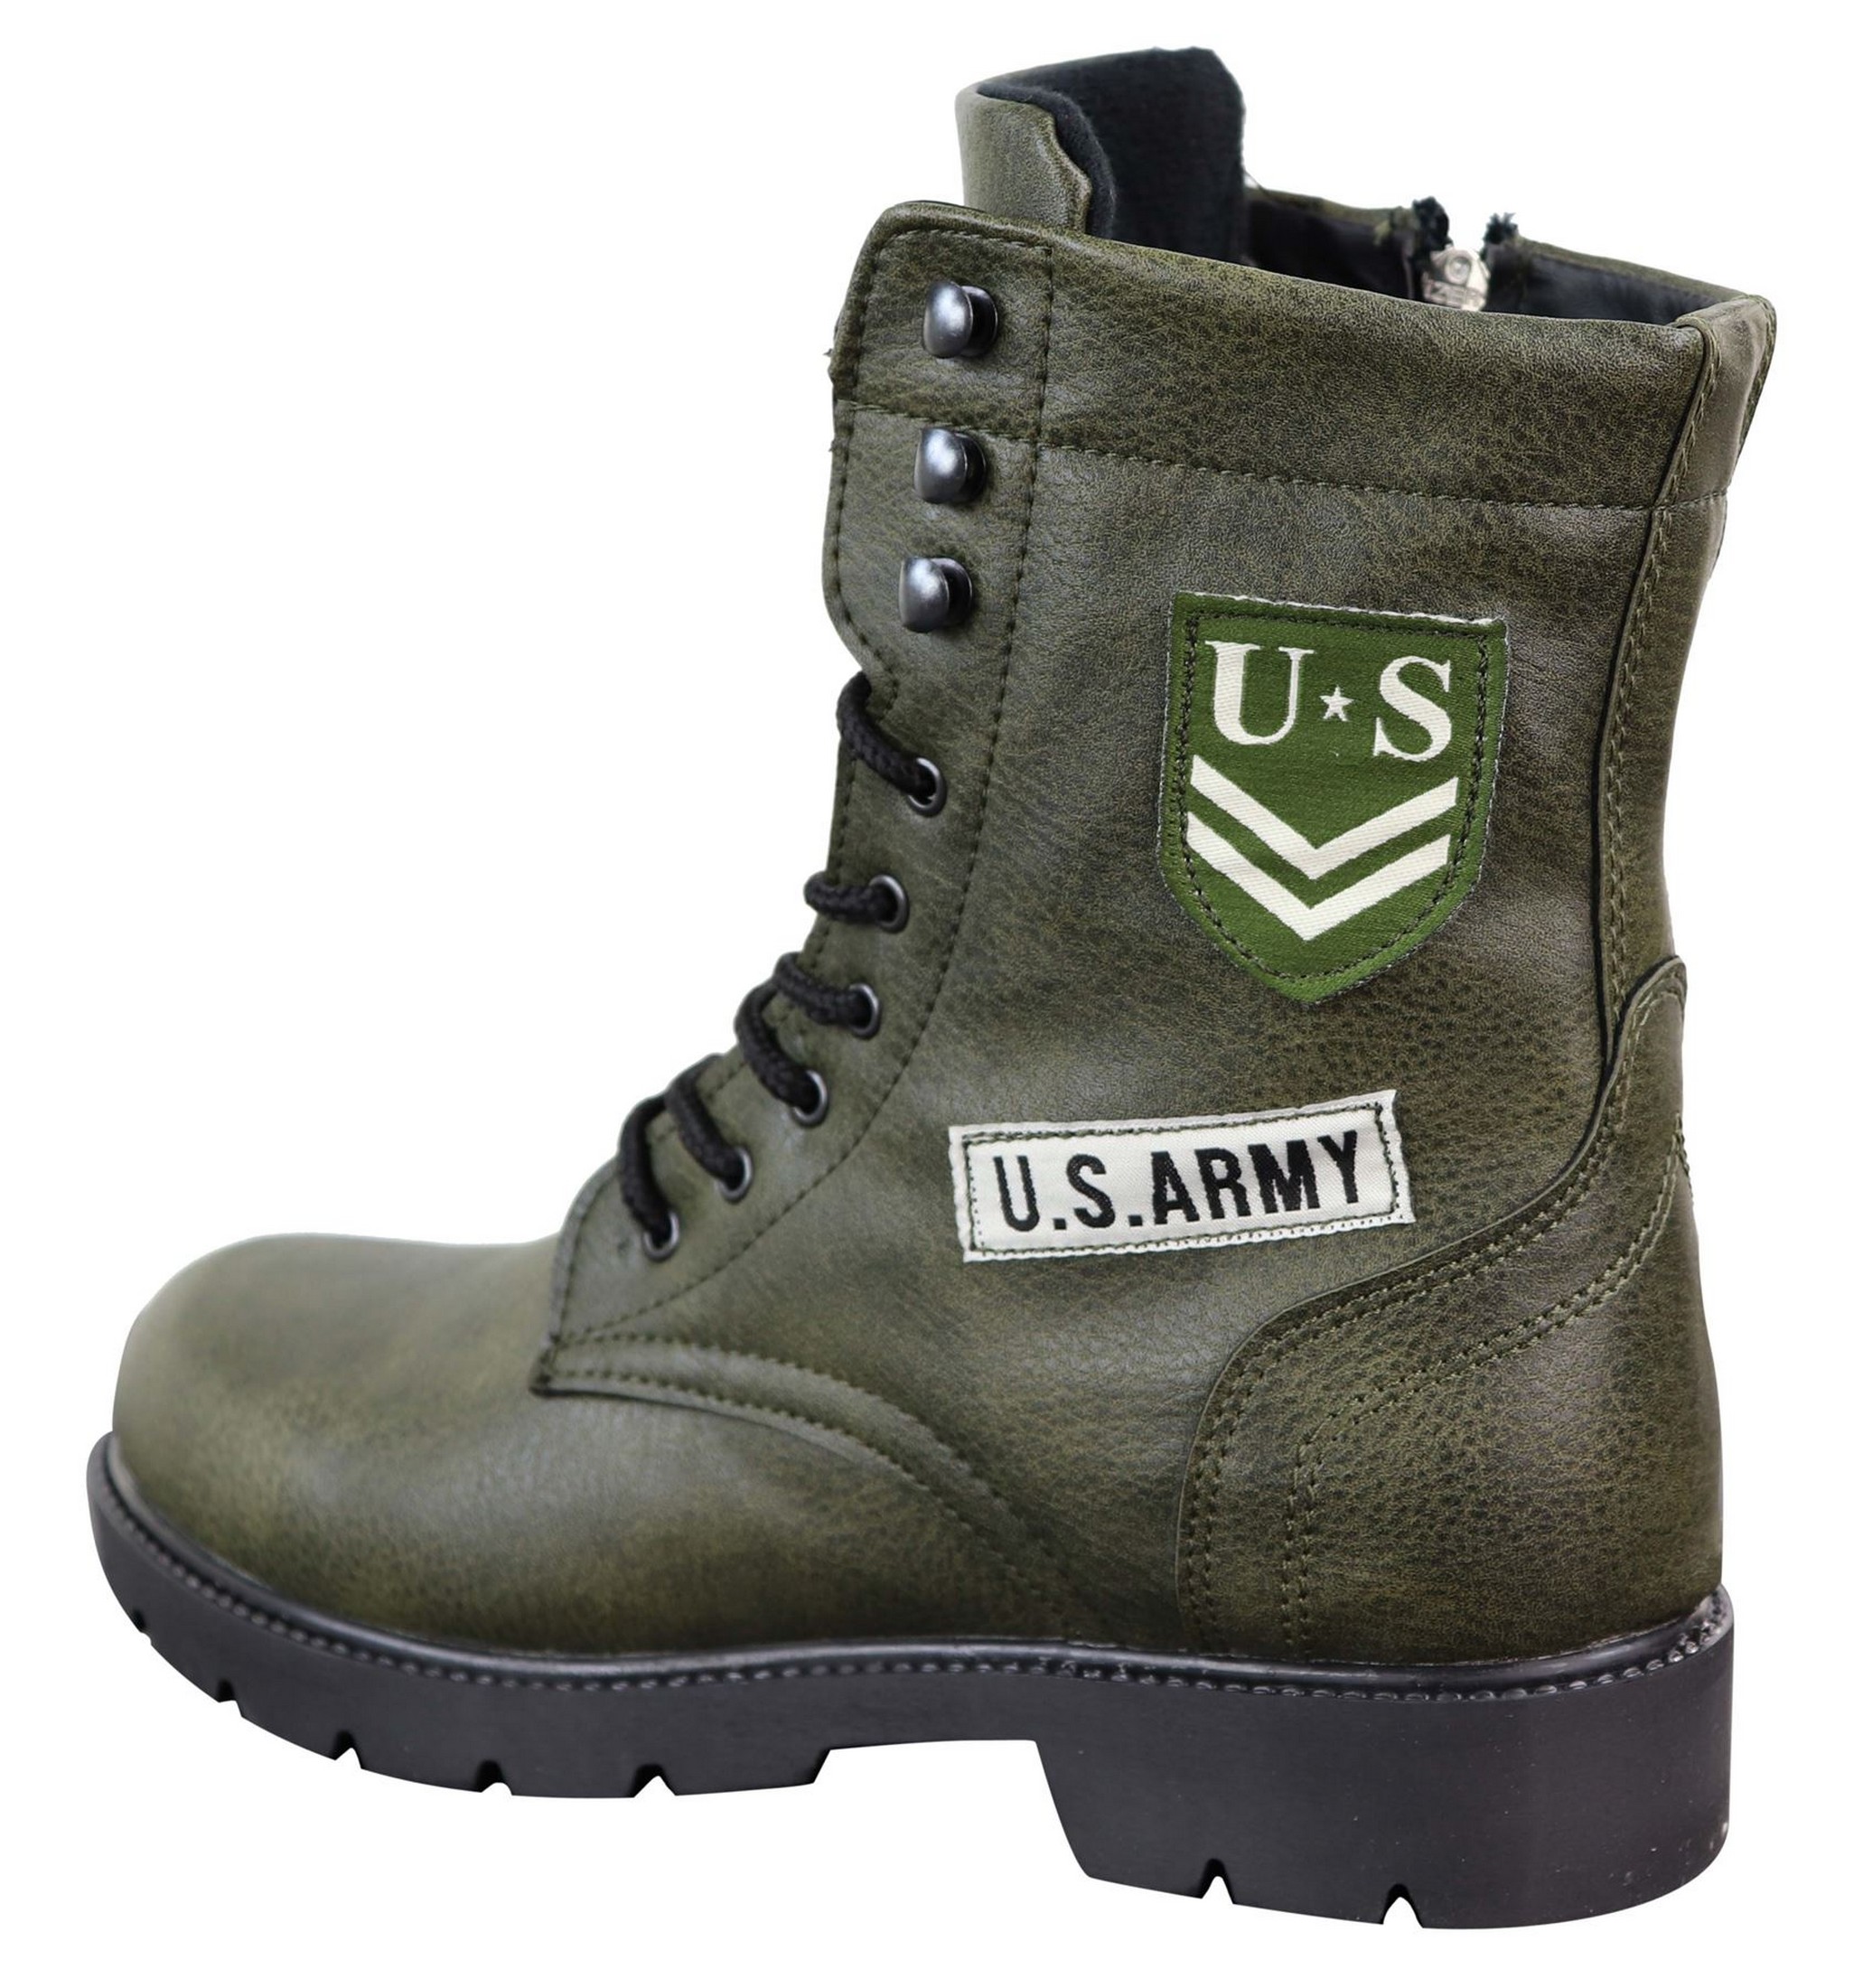 Mens U.S. Army Style Ankle Boots | Happy Gentleman